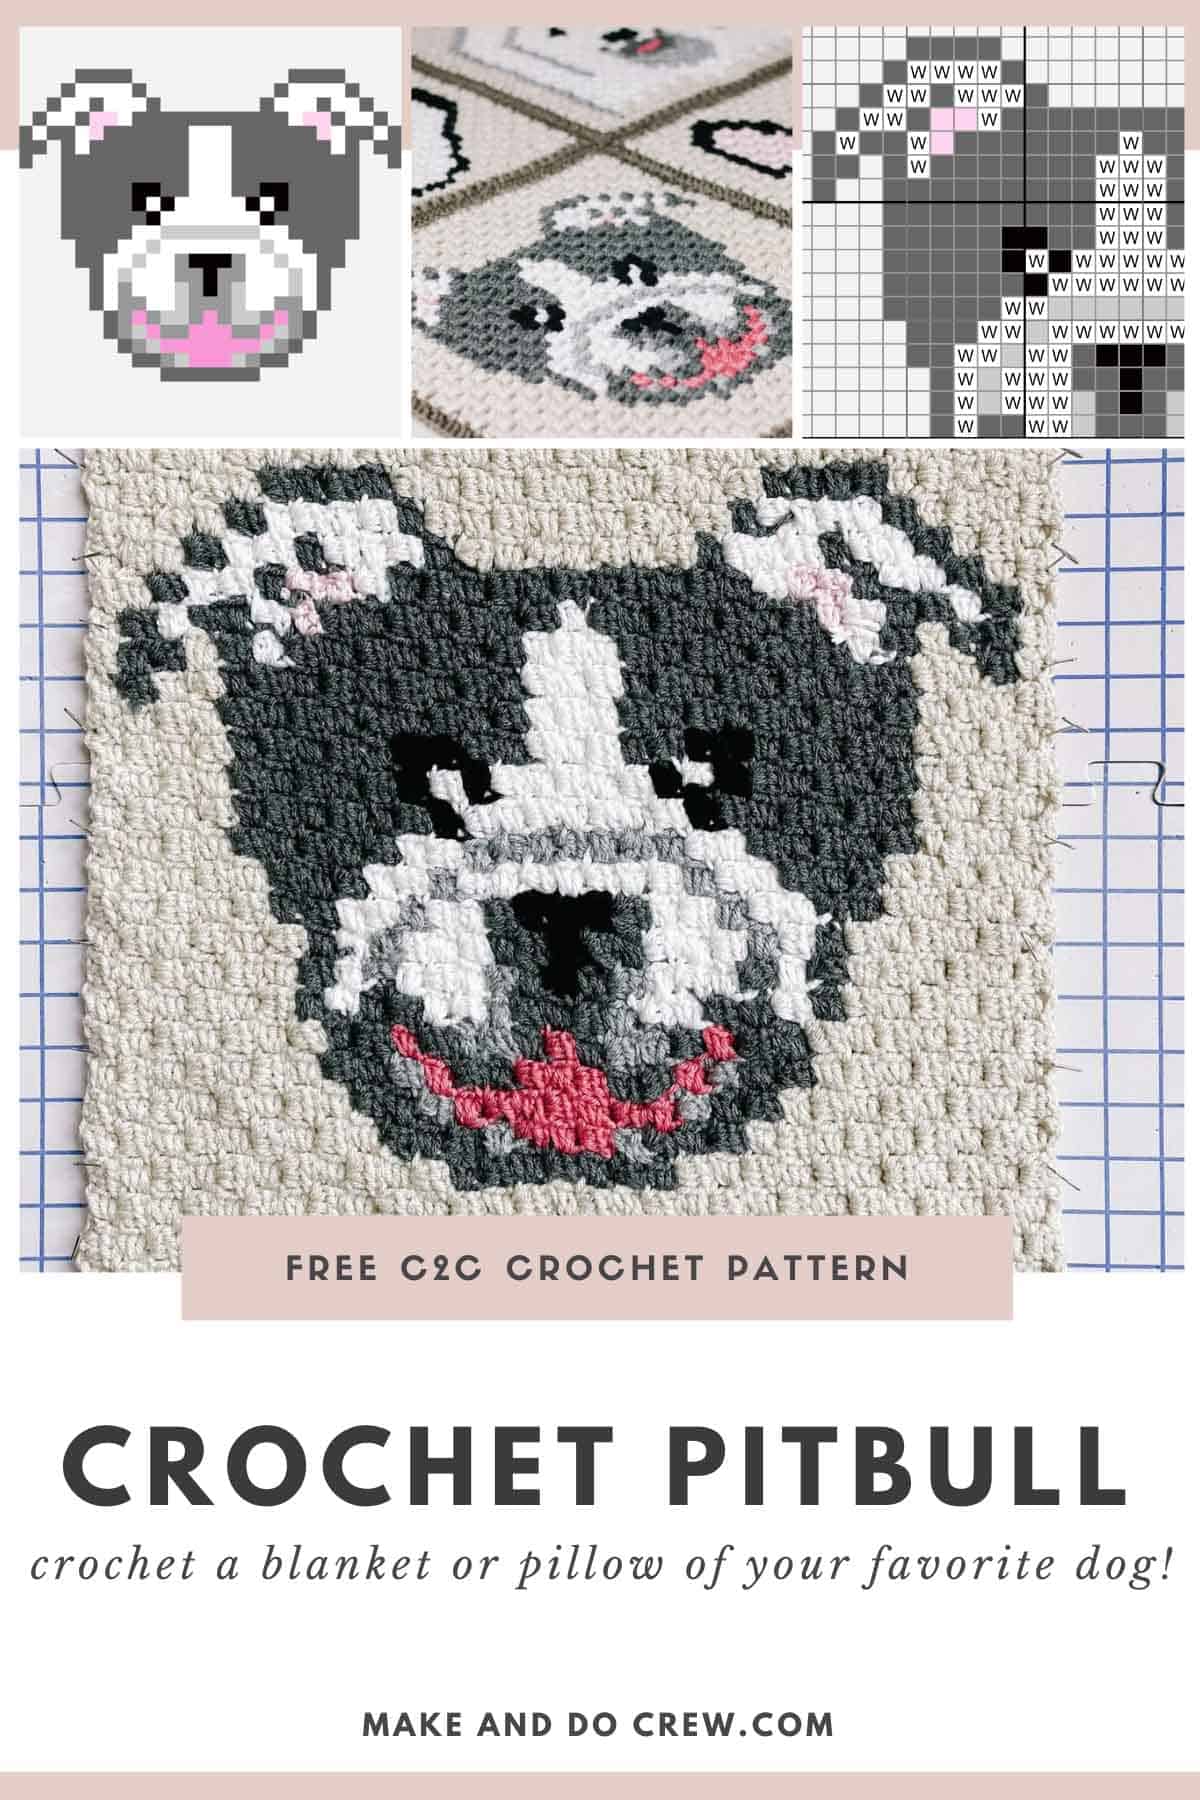 This image shows a free crochet pattern for a corner to corner crochet square featuring a gray and white Pitbull dog face. These photos include a front image of the crochet square on a blocking board, a close up image of the dog square, a pixilated version of the dog square, and an angle shot of the dog square in a blanket.